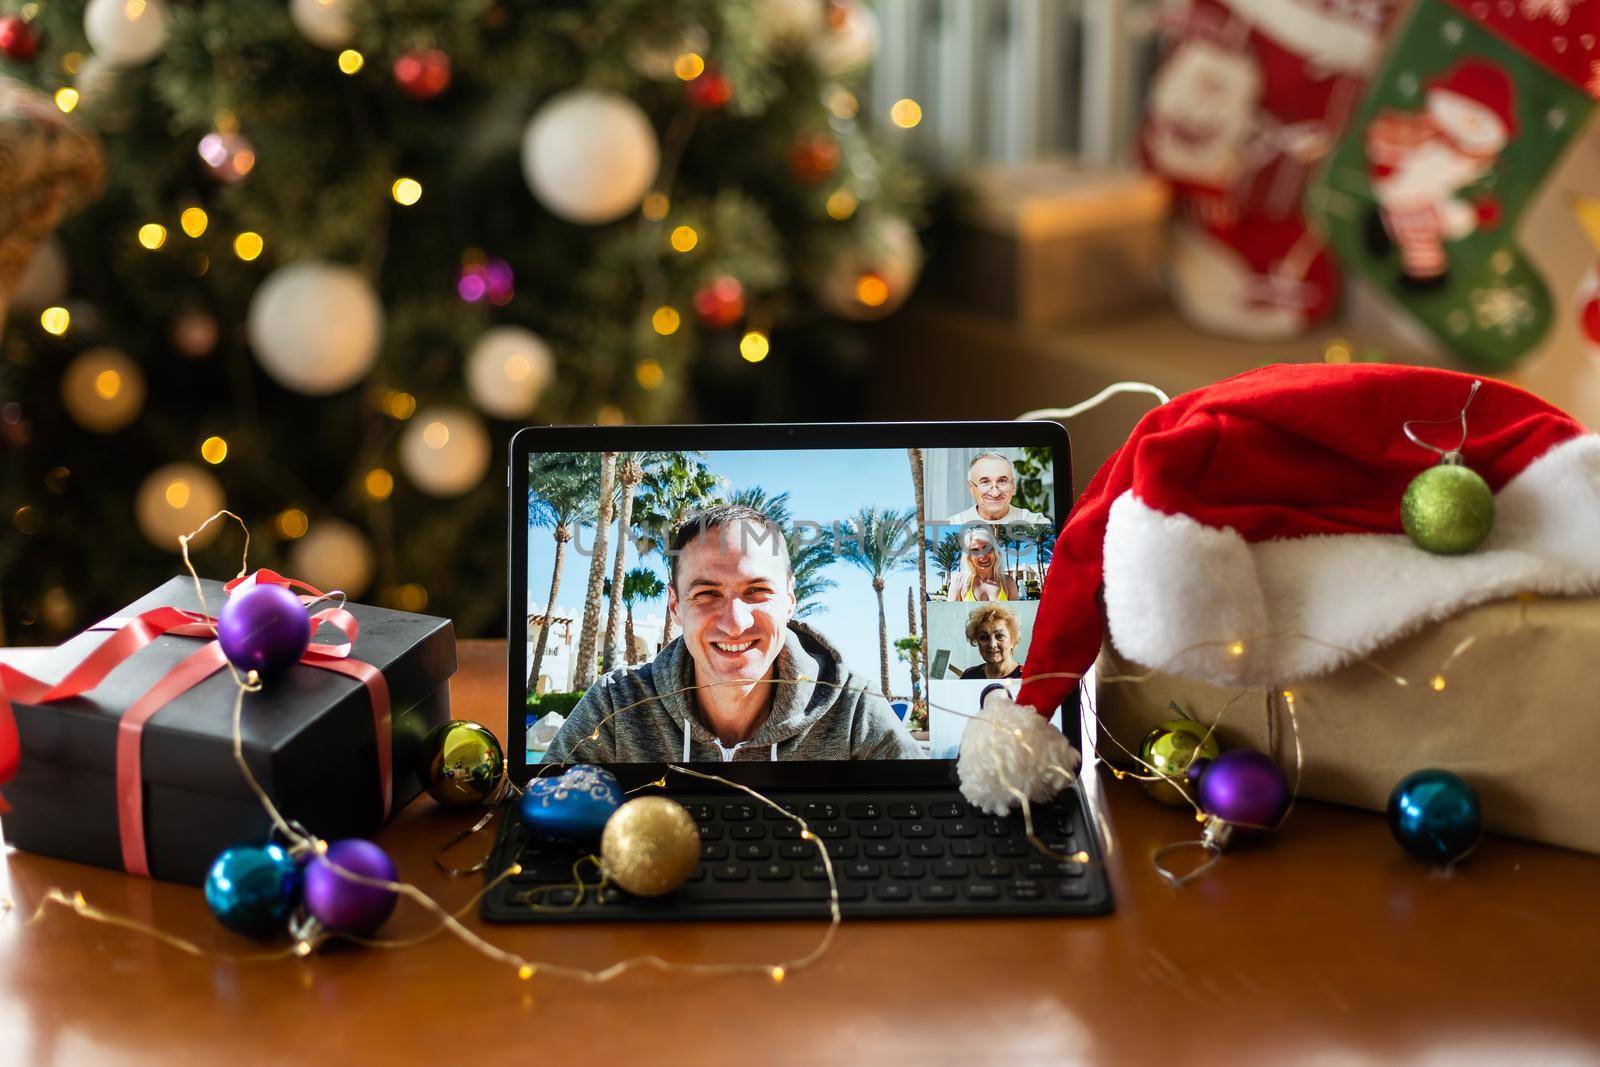 Smiling handsome young man enjoys decorating the Christmas tree while holding a tablet for video call or a selfie at home. Celebrating the New Year alone.